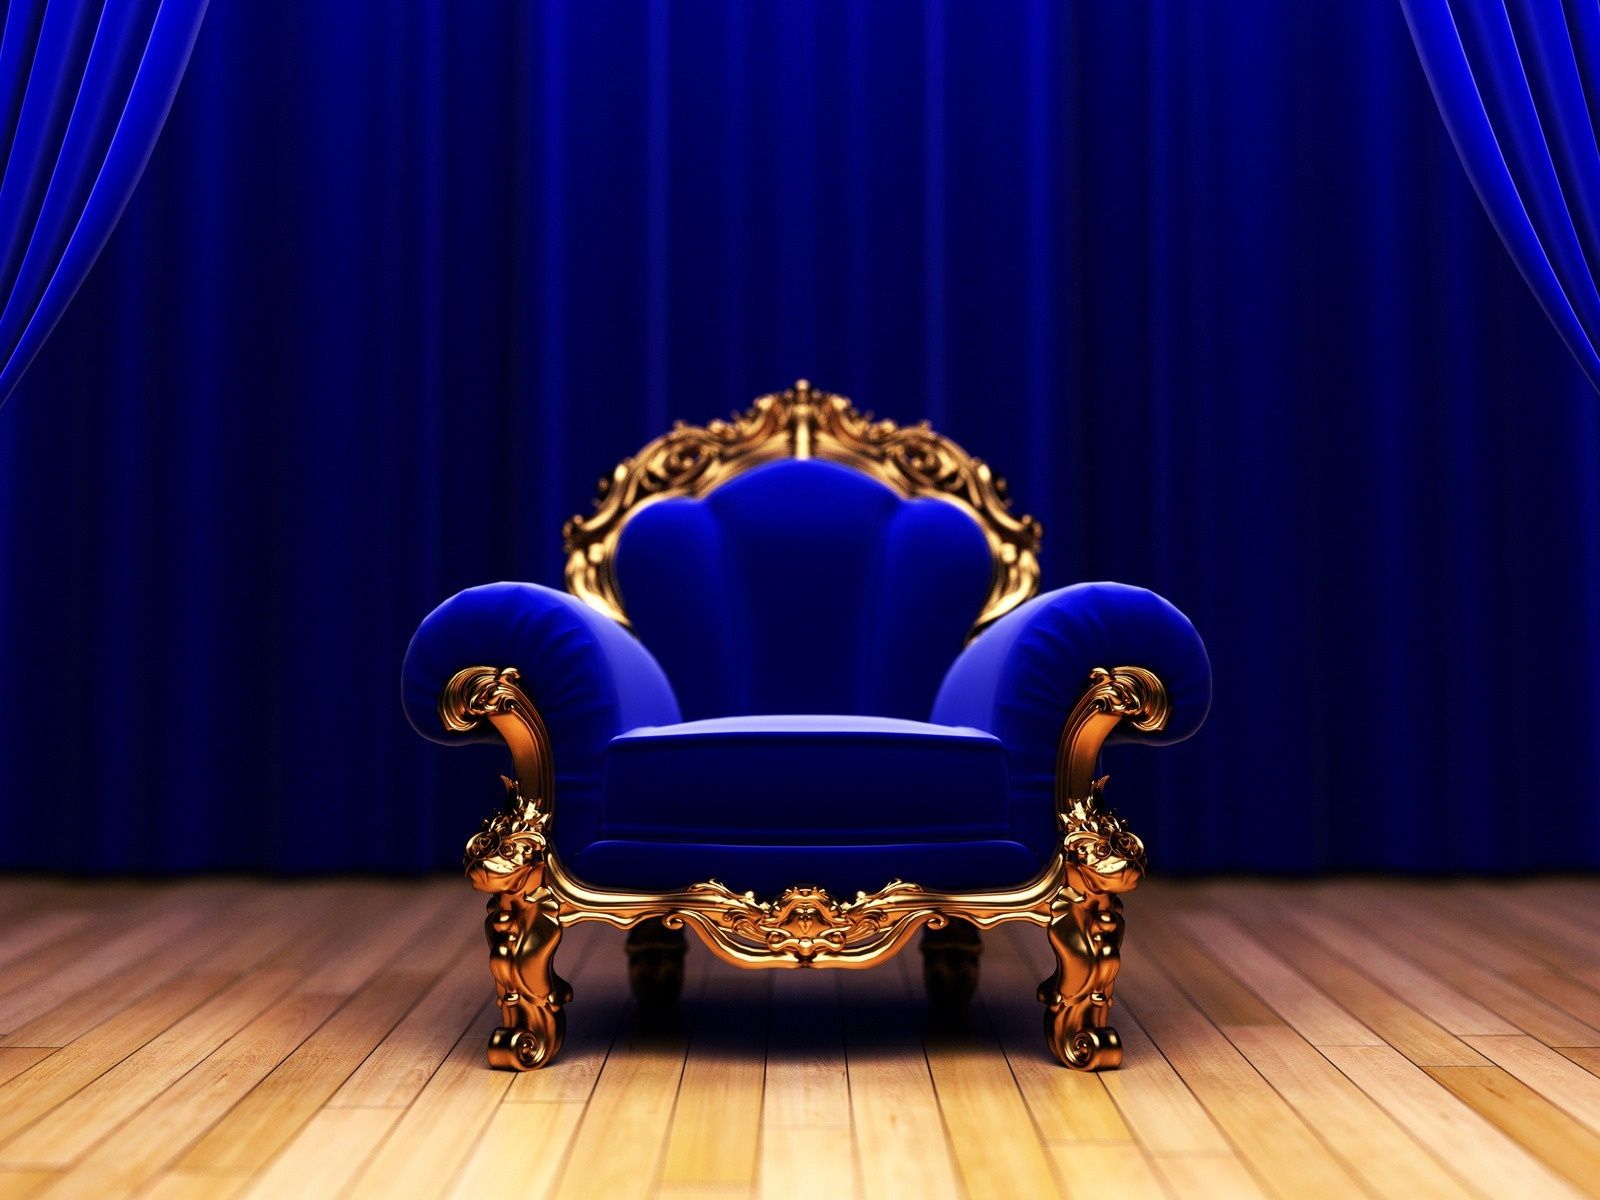 Other Royal Armchair Furniture Blue Gold Architecture Wallpaper